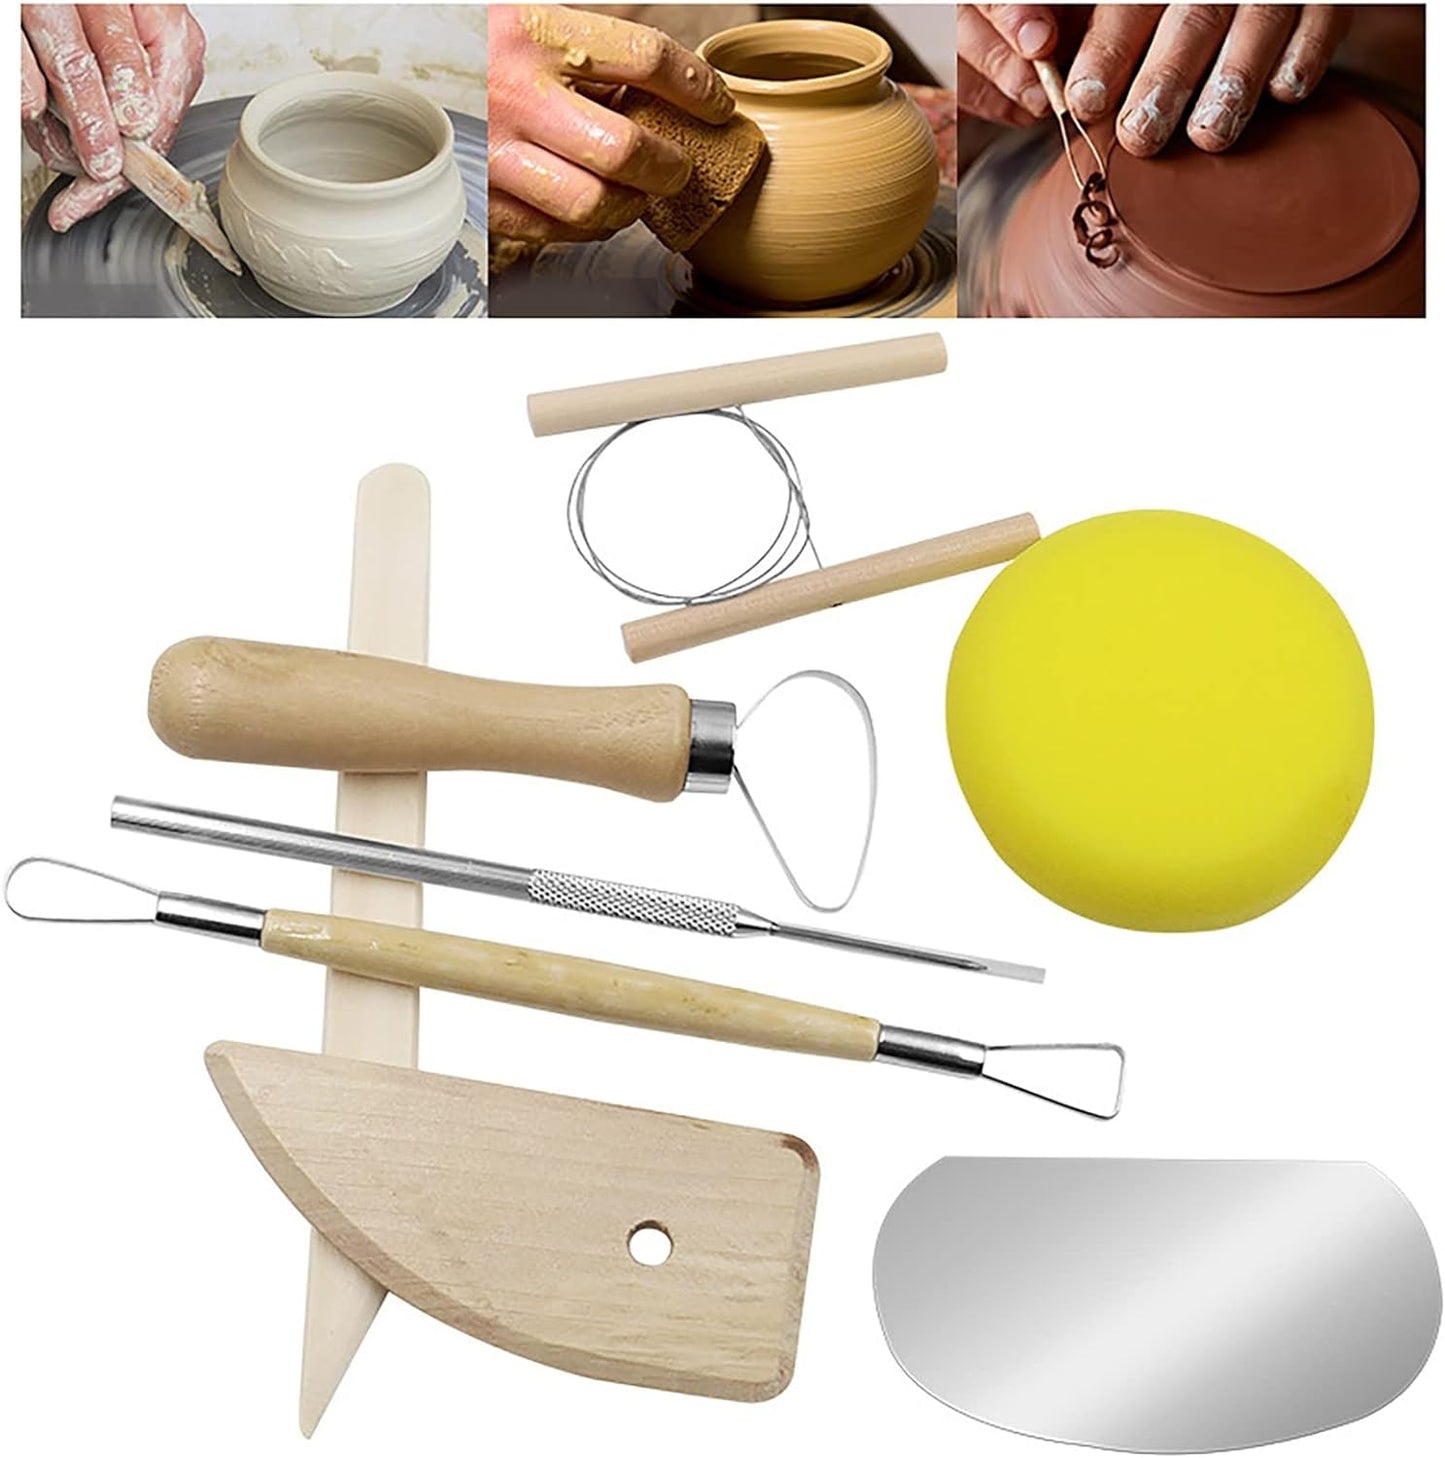 Clay Tool Set Wooden Pottery Clay Sculpture Carving Tool 8 Piece Set Beginner DIY Making Modeling Carving